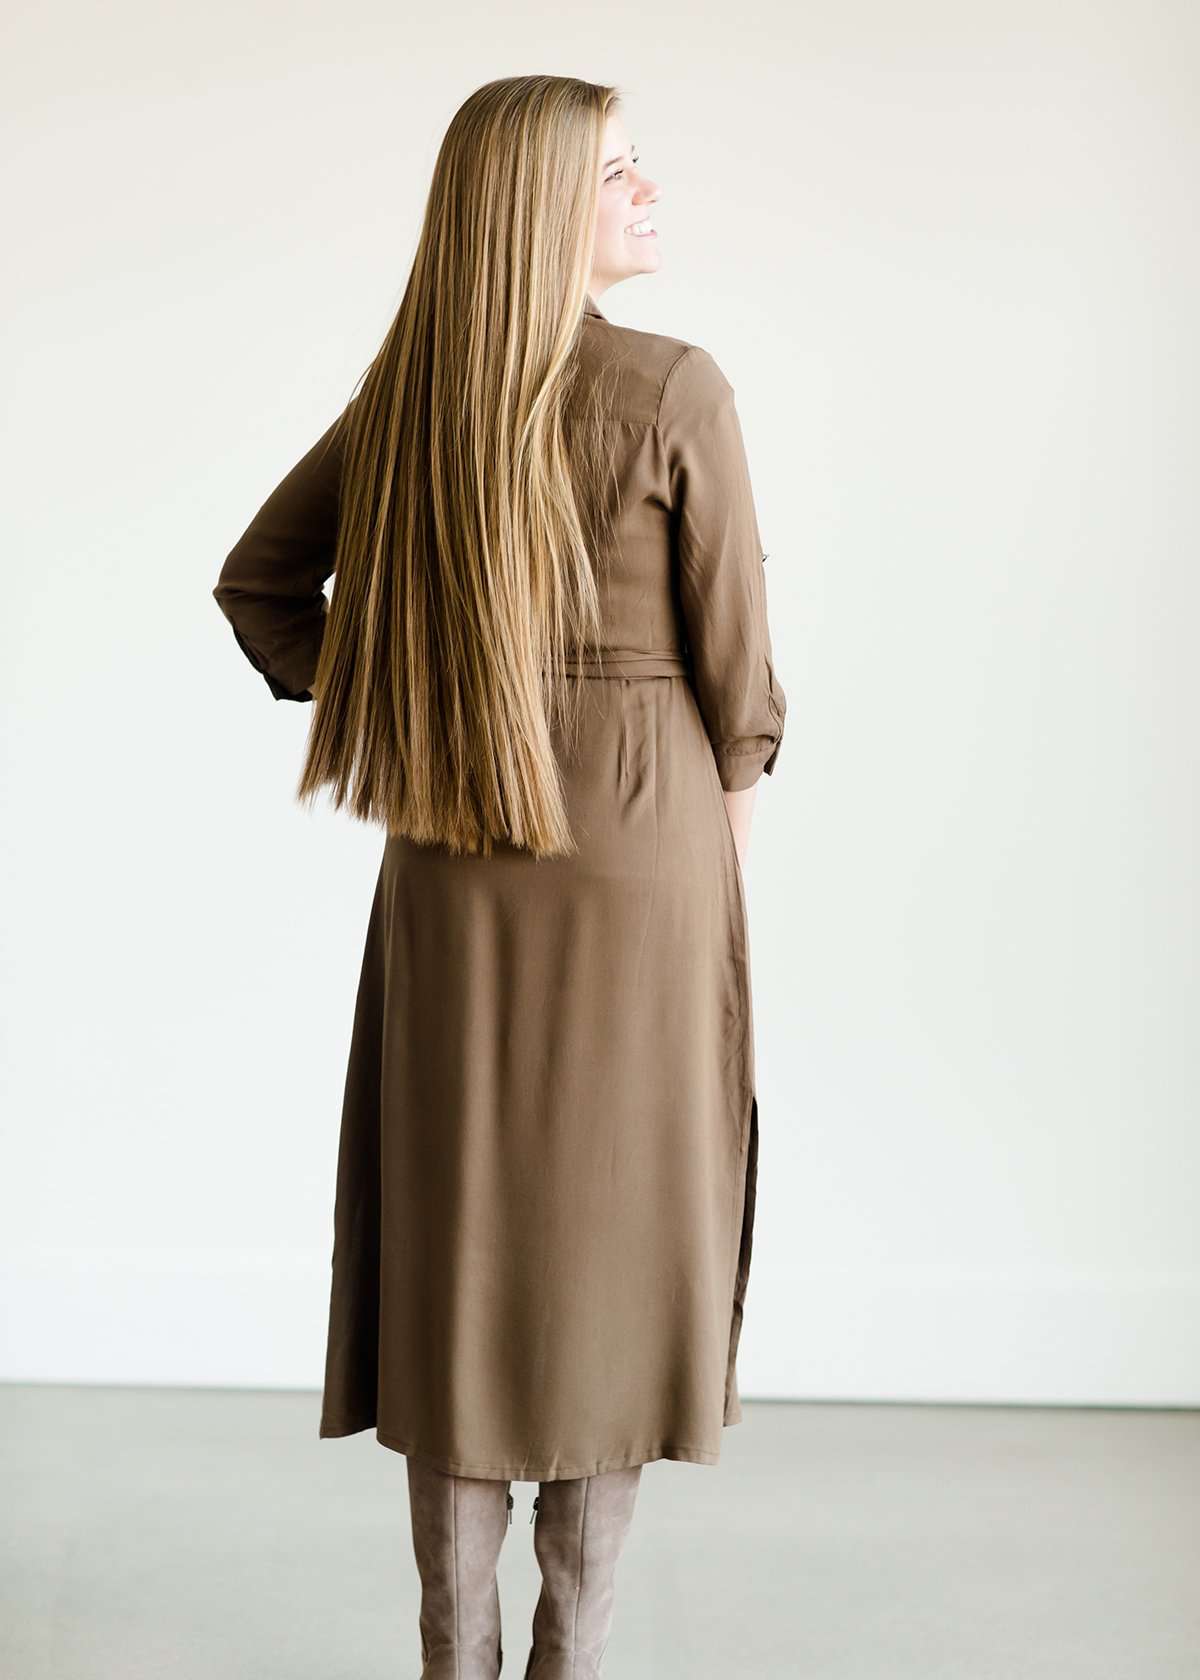 Olive colored belted midi dress with buttons running down the front.